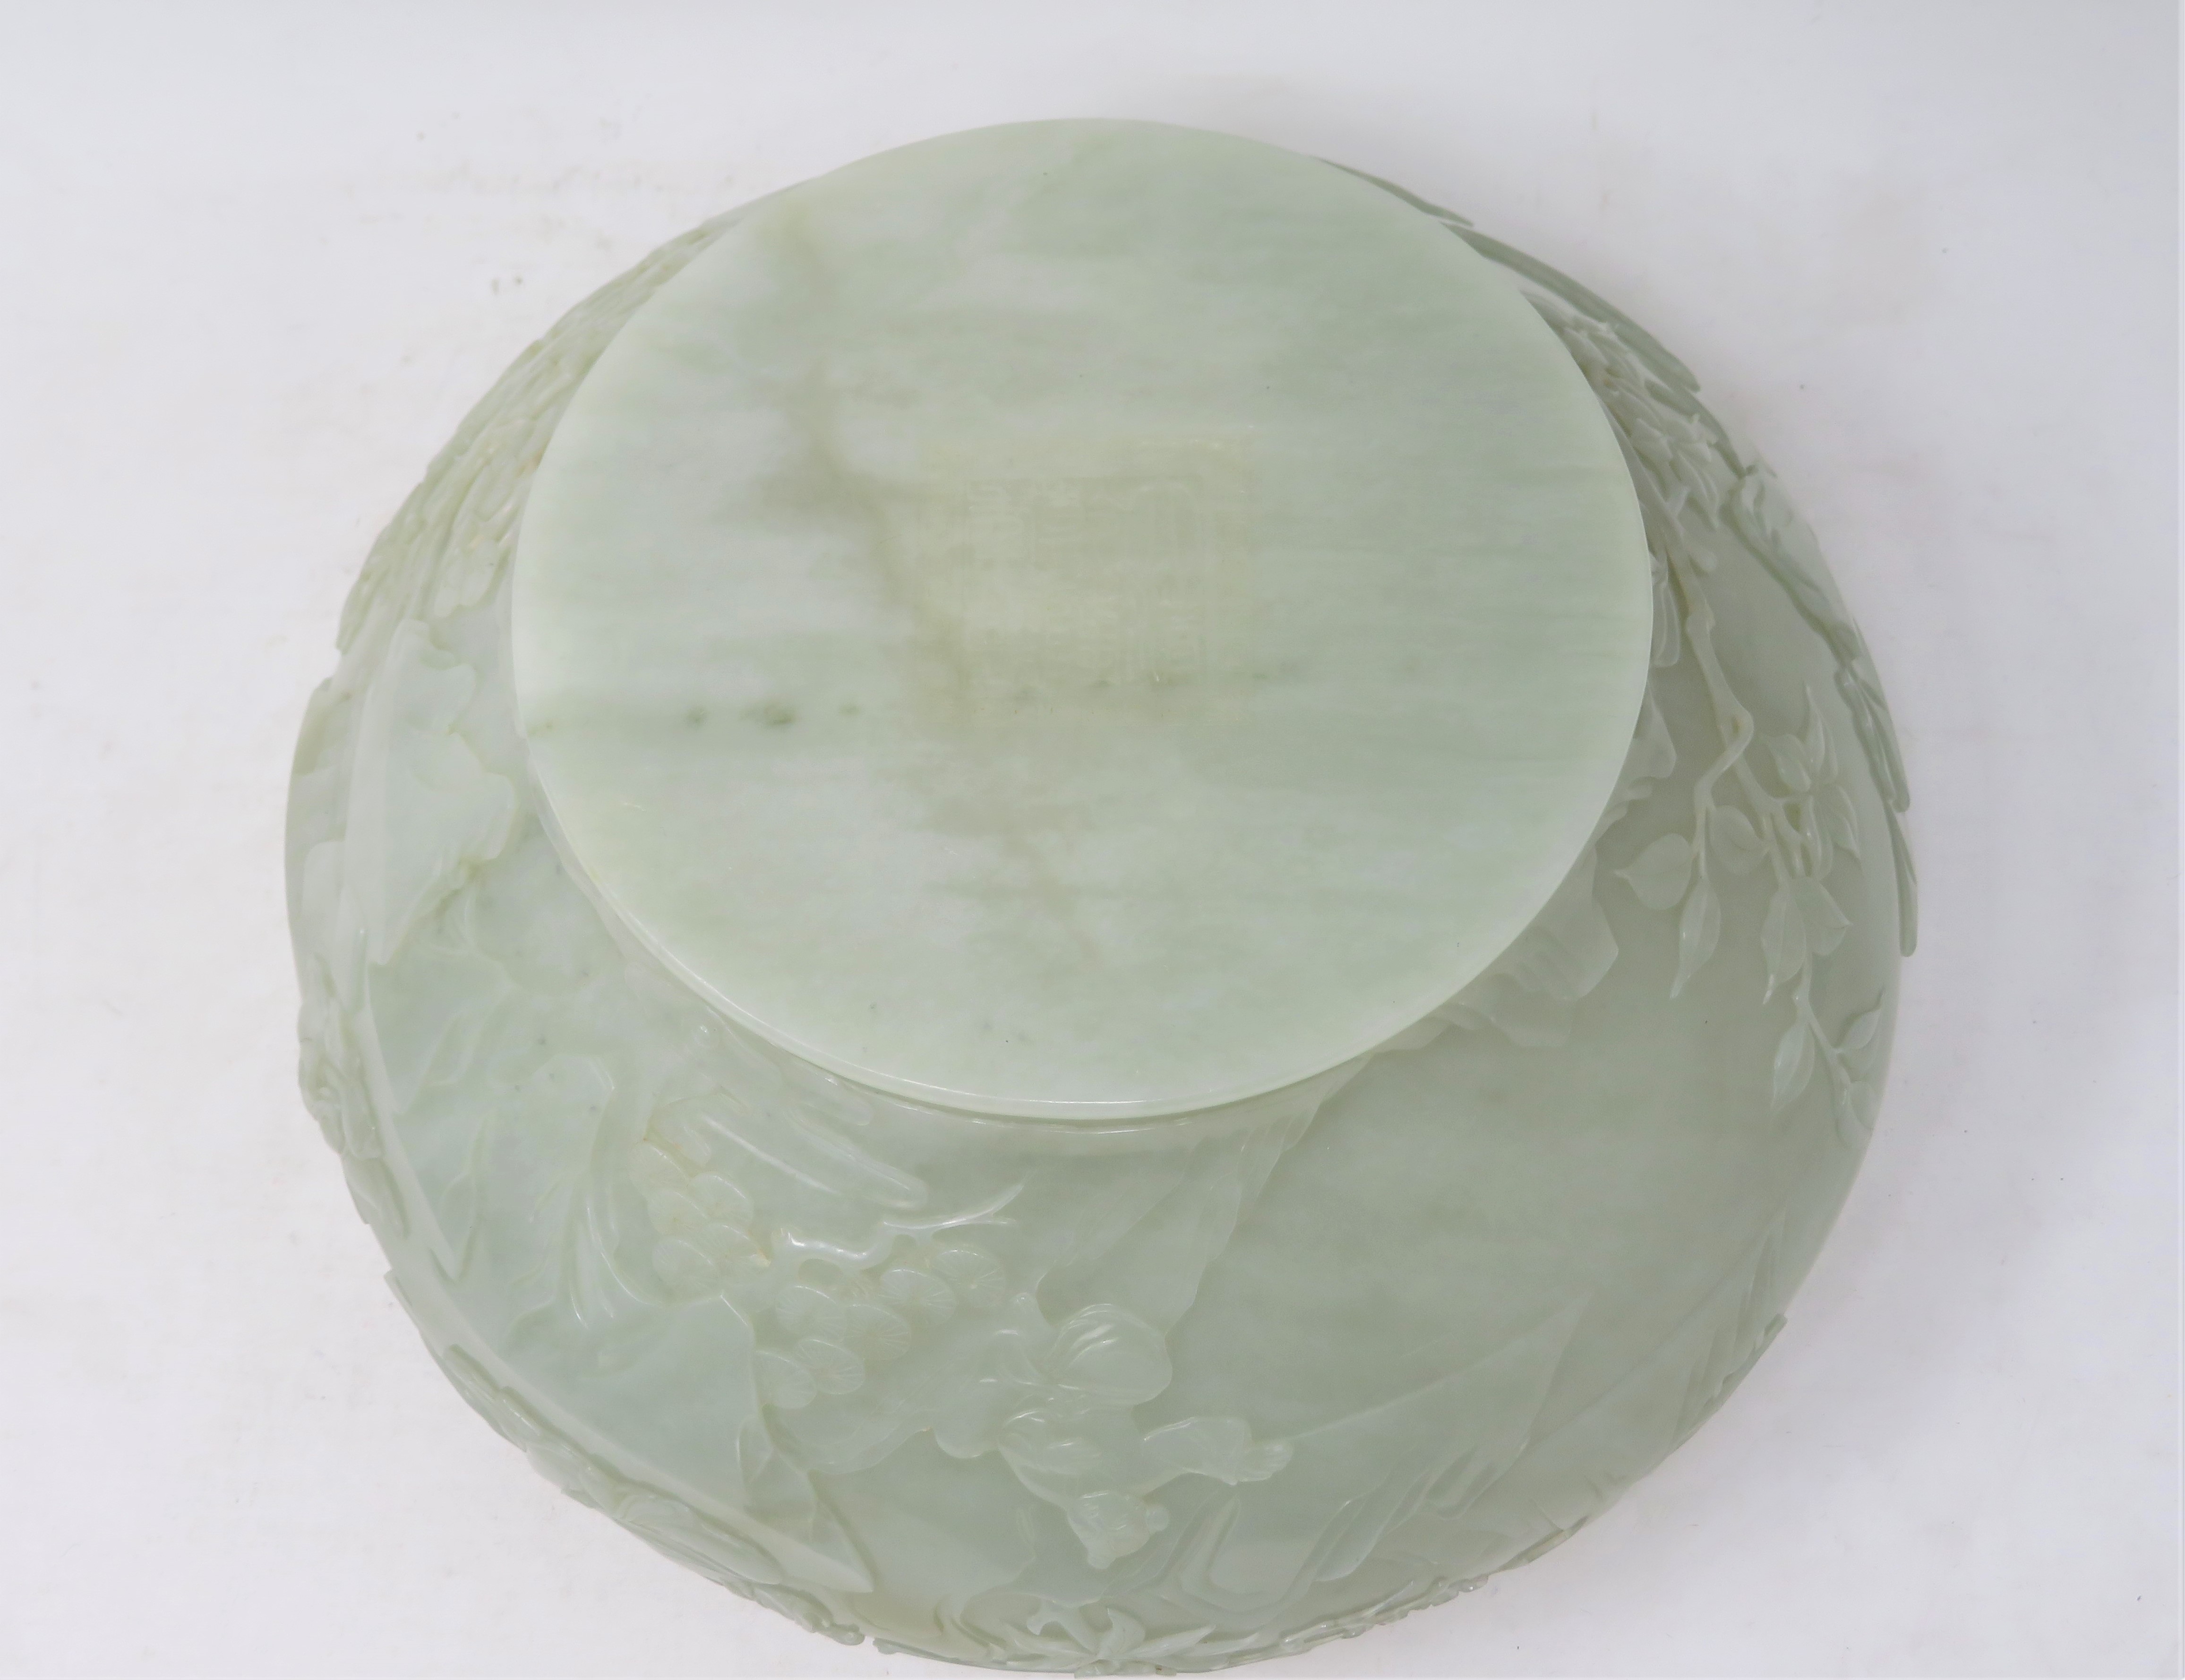 A CHINESE PALE CELADON JADE 'SCHOLARS' BOWL - Image 7 of 10